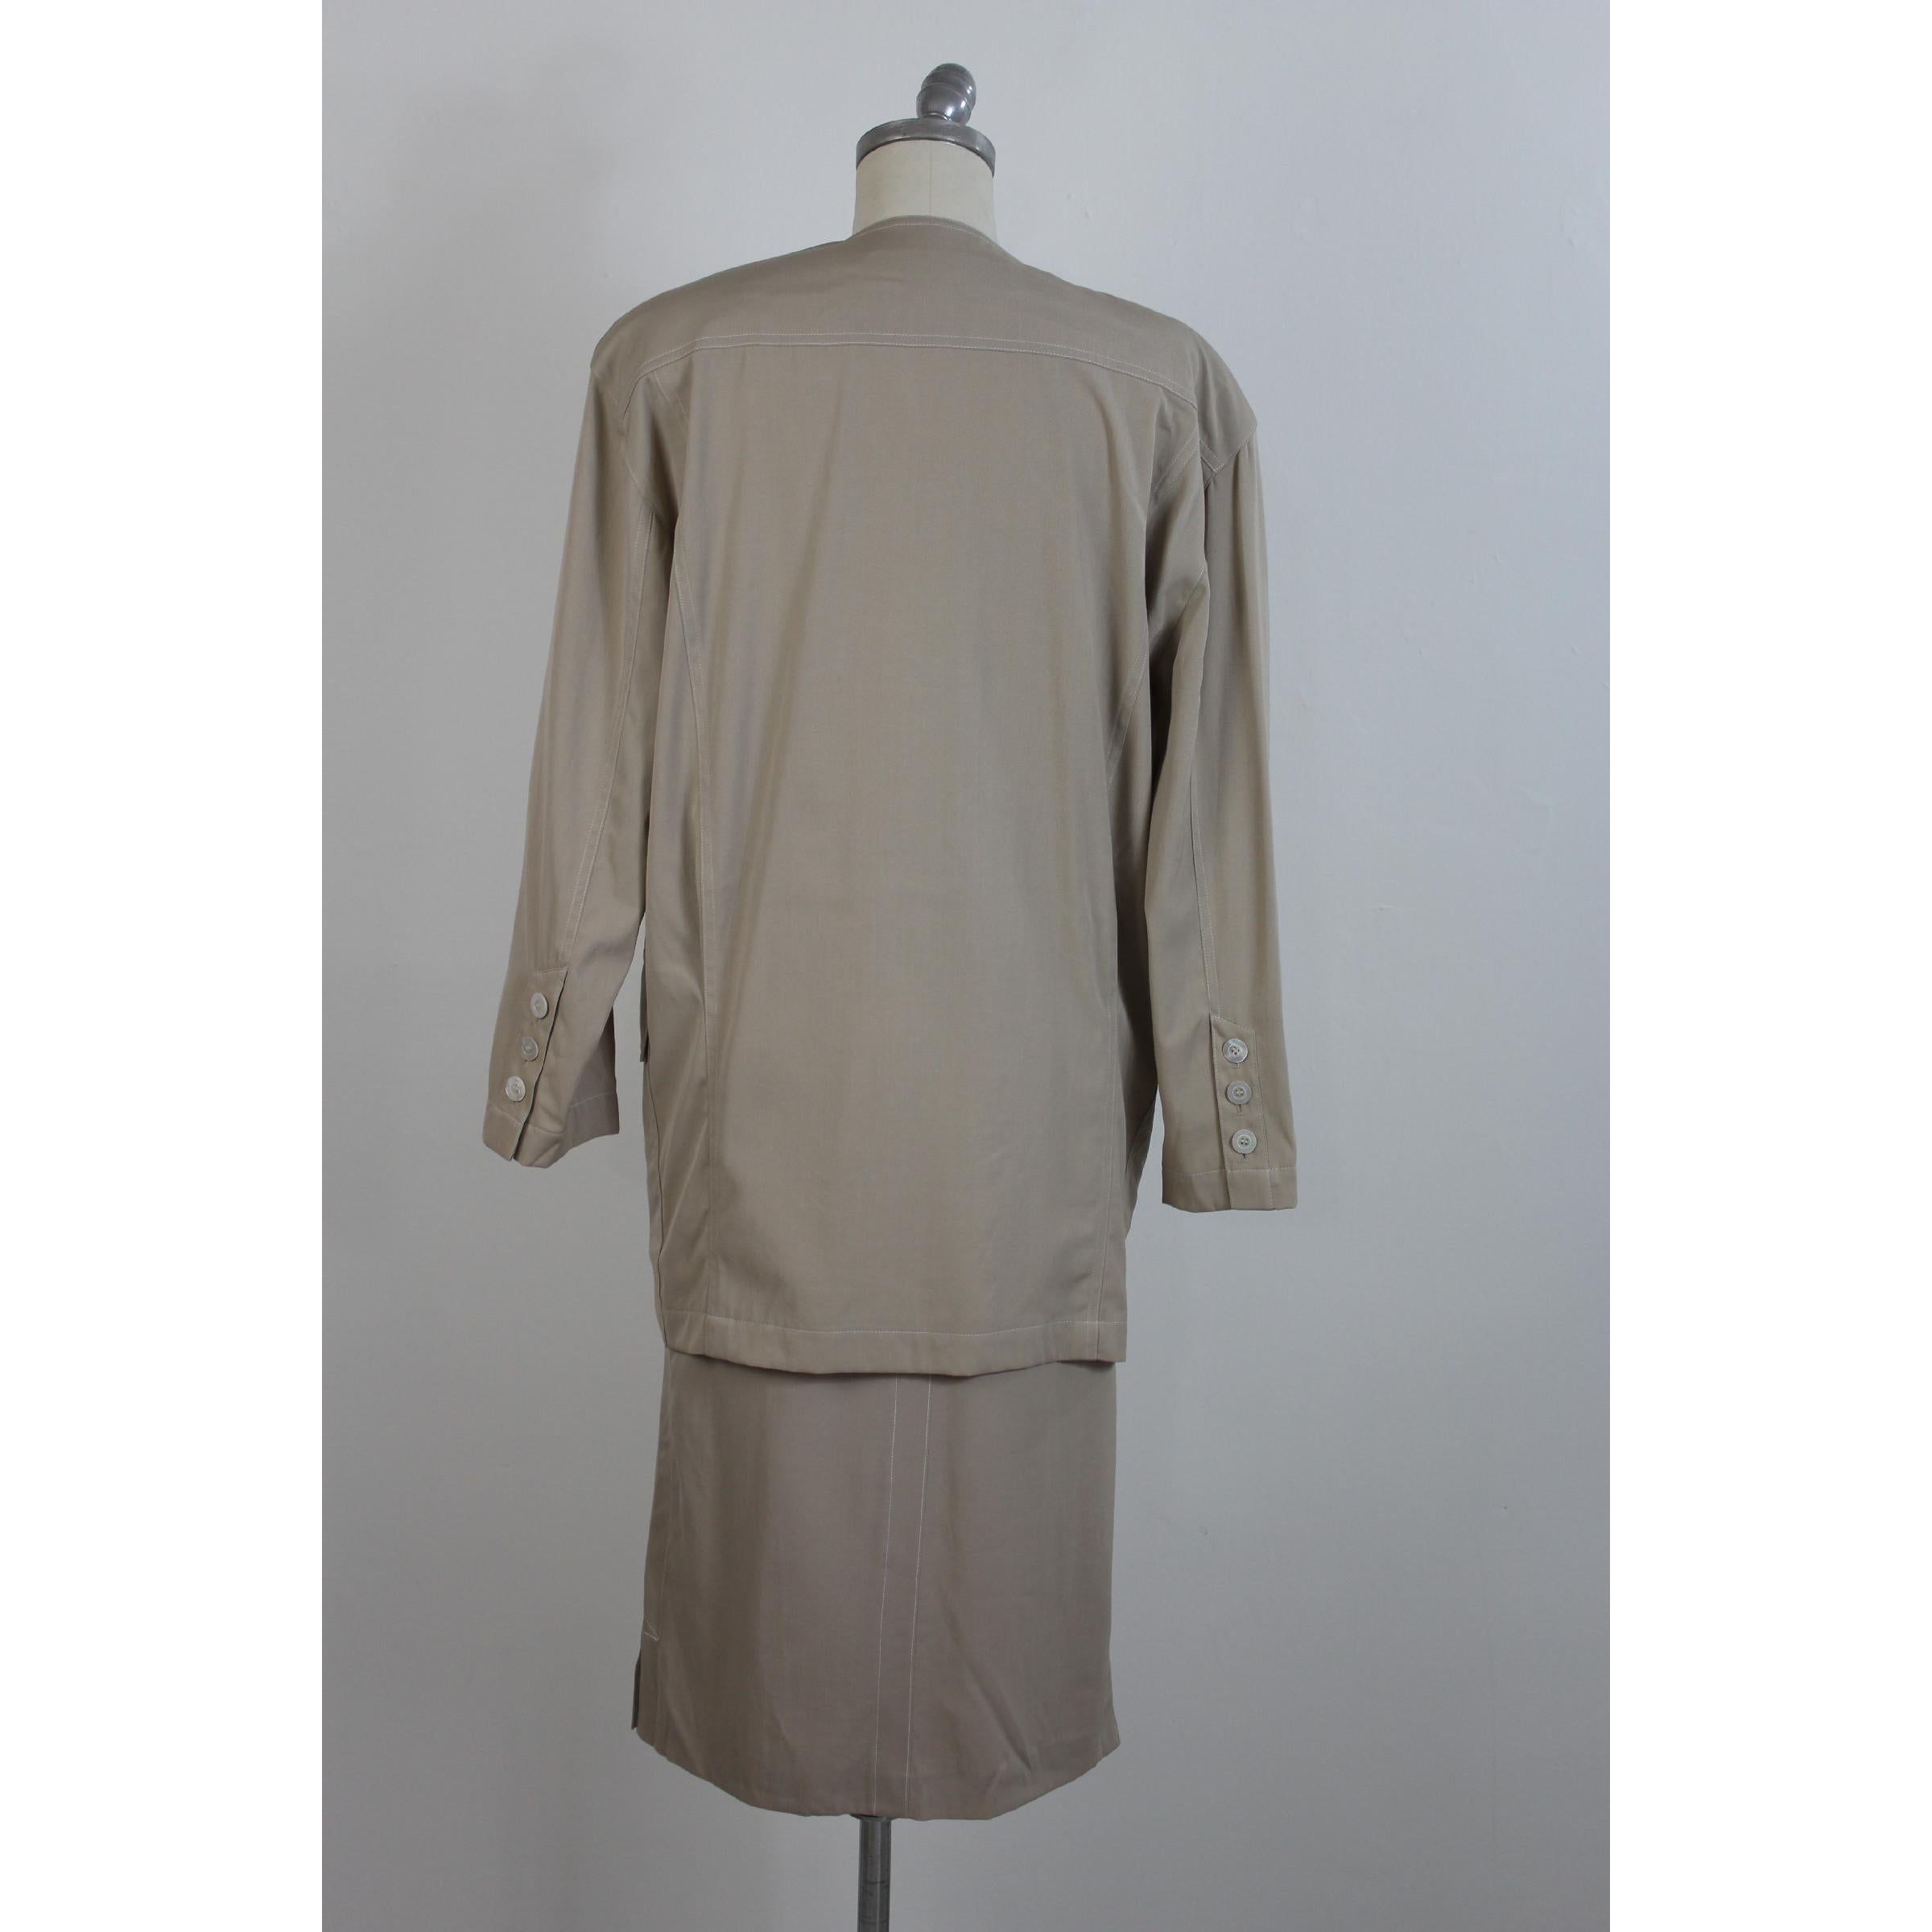 Escada by Margaretha Ley complete safari model for women. Beige color, 75% cotton 25% wool, wide model jacket with mother-of-pearl buttons closure, two side pockets, sheath model skirt. New without label.

Size 42 It 8 US 10 UK

Shoulders: 48